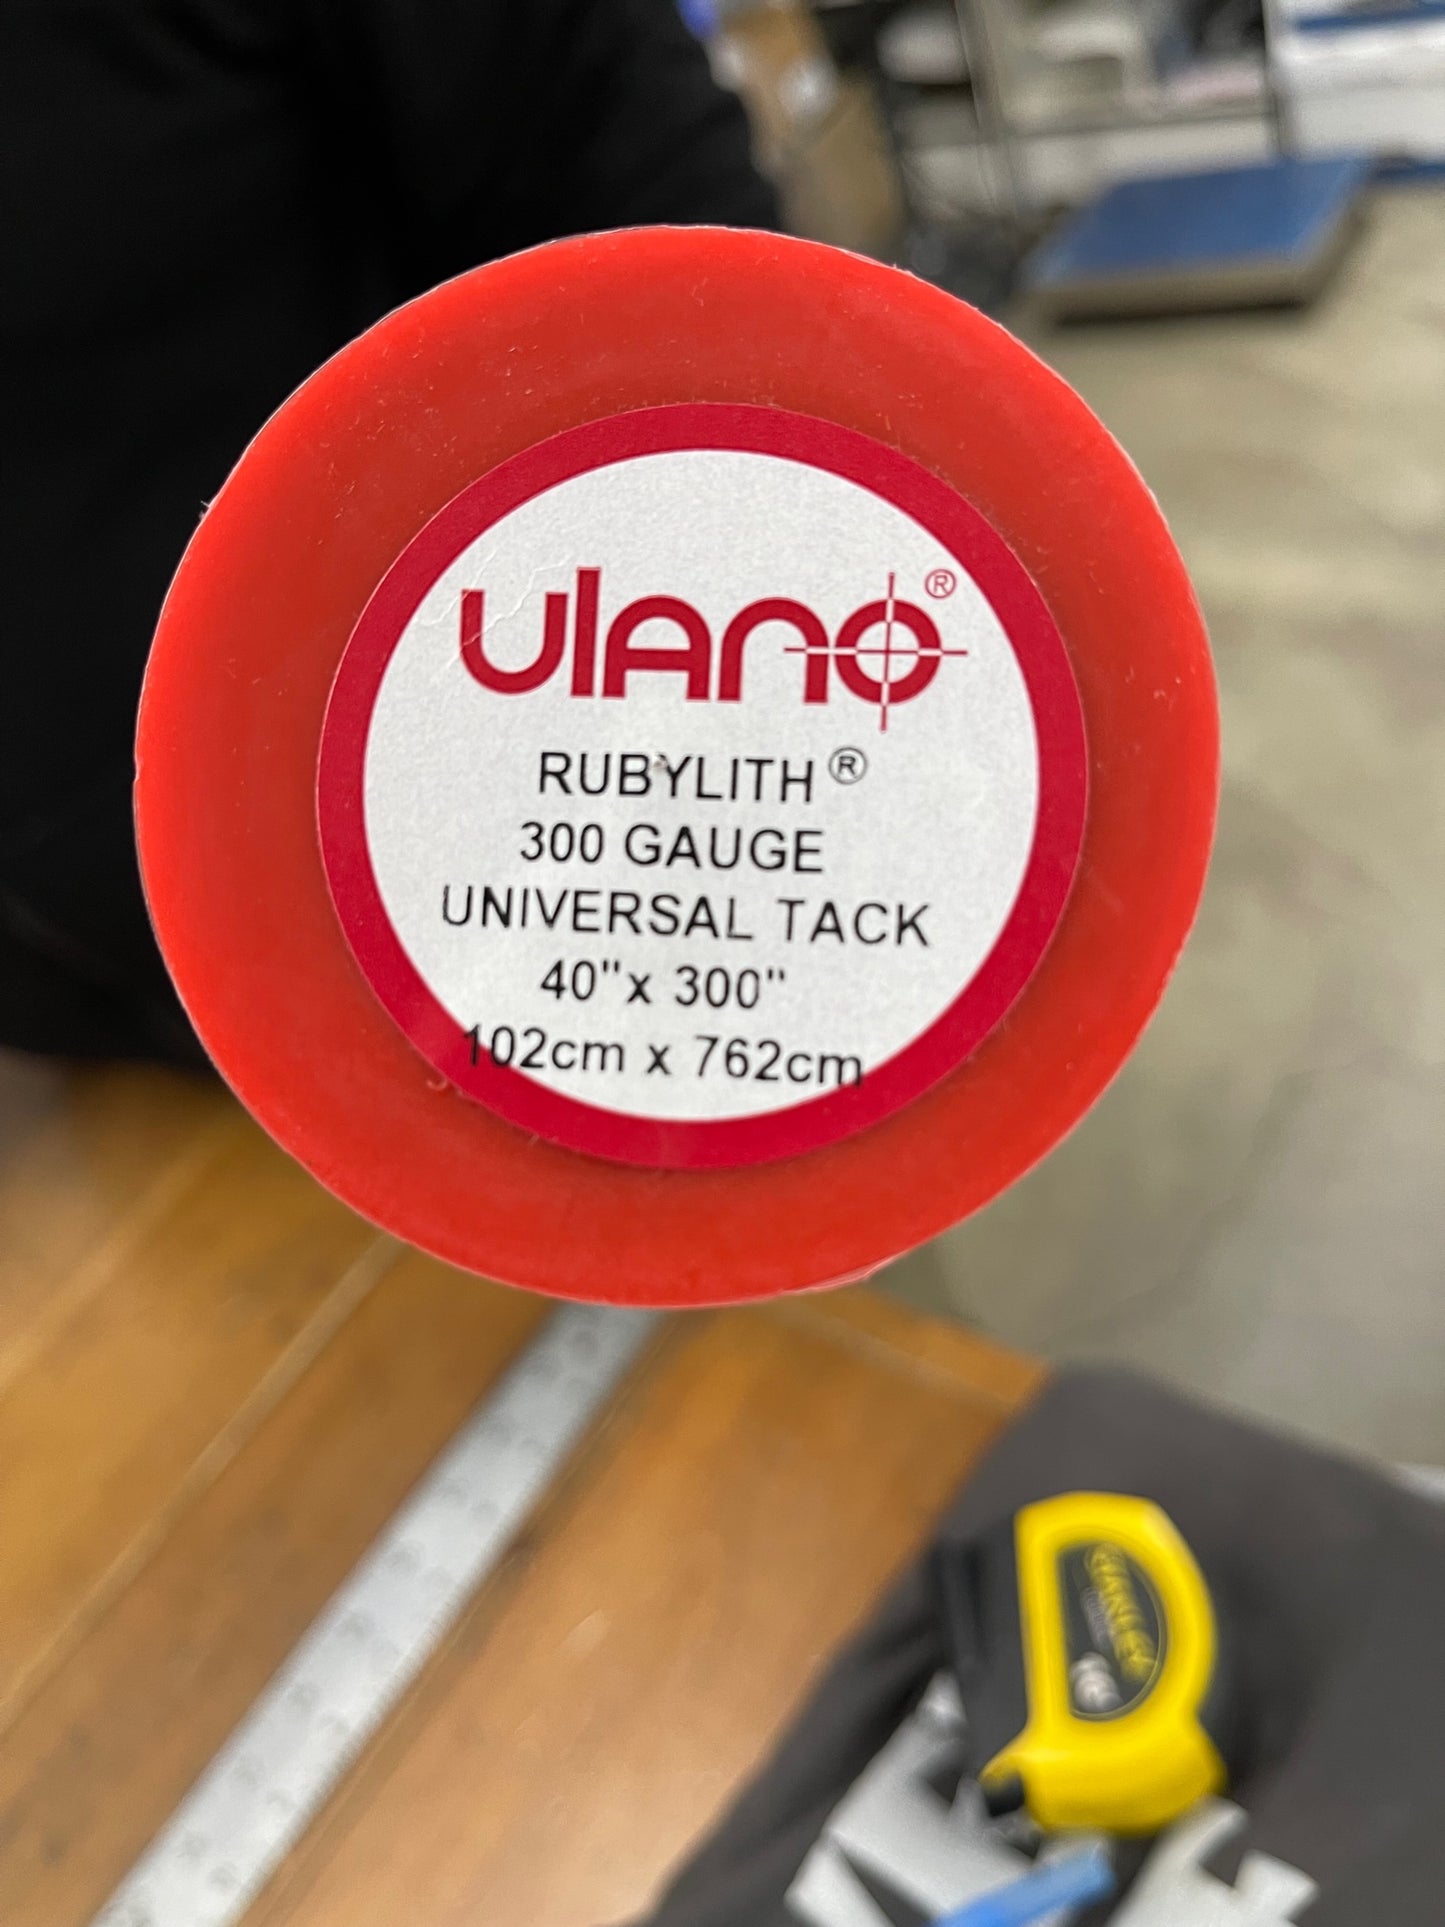 ULANO Rubylith Universal Tack 3mil 300 Gauge 40" x 300" 1 Roll